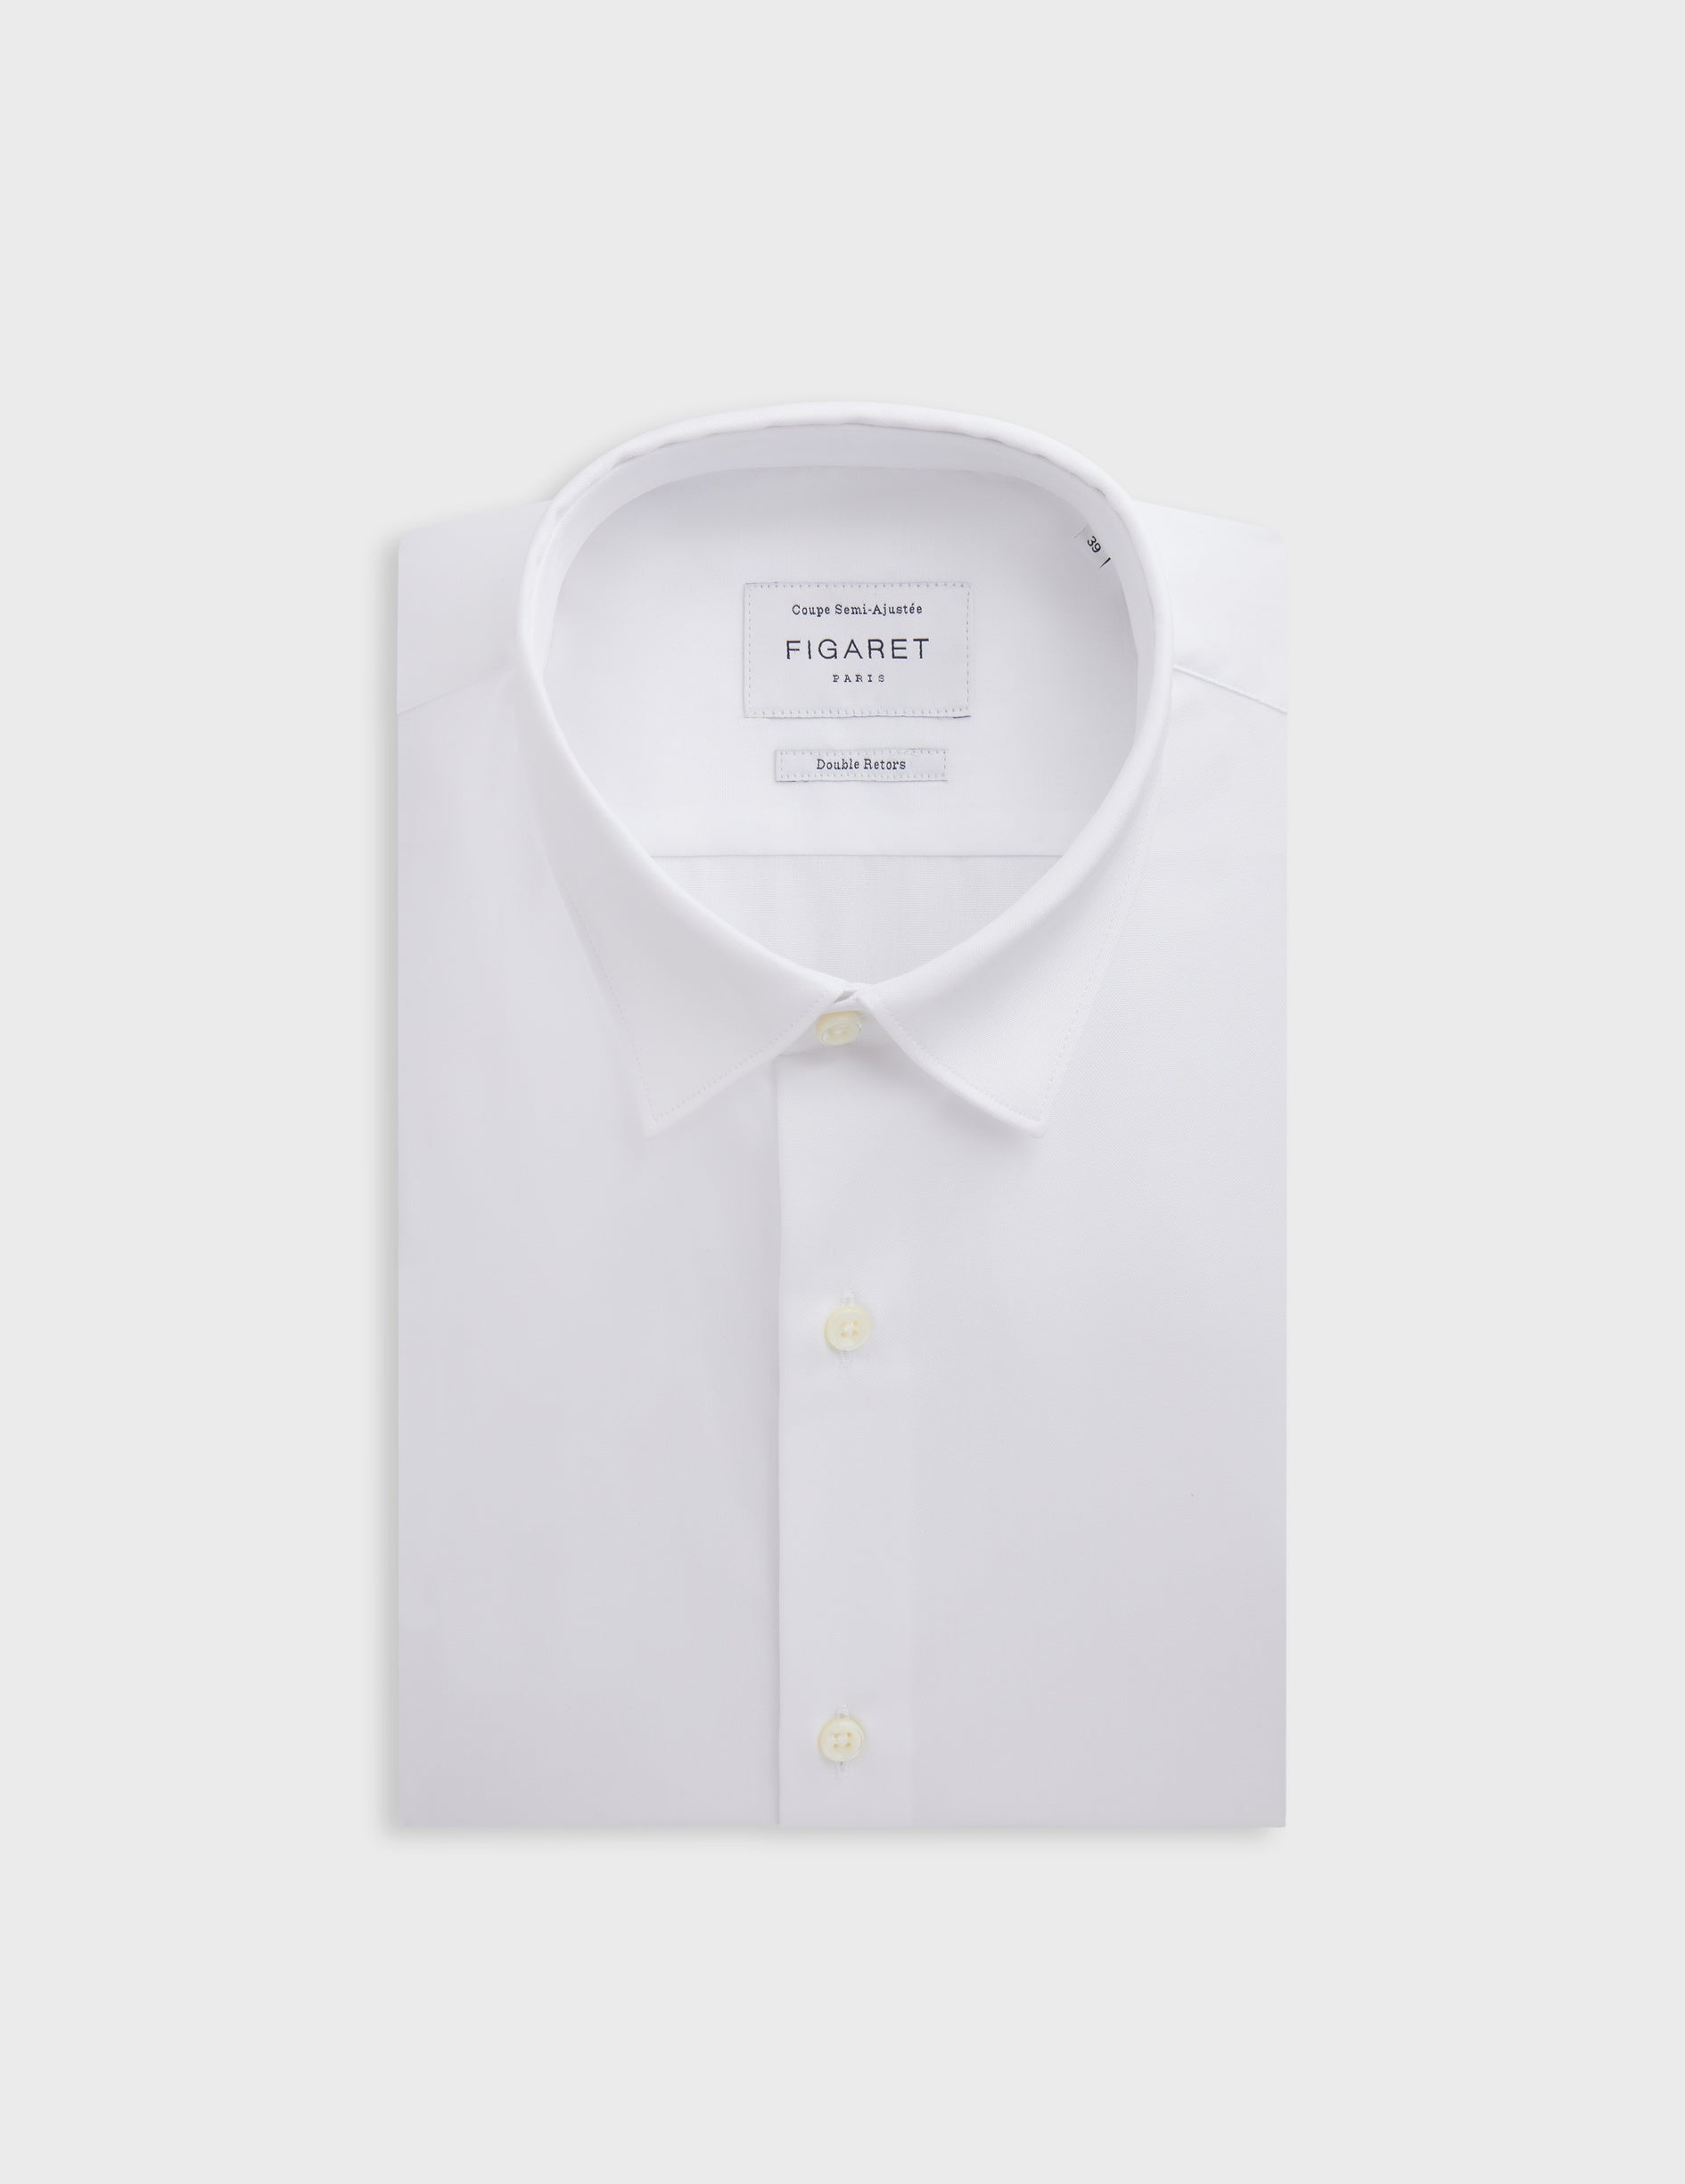 Semi-fitted white shirt - pin point - Figaret Collar